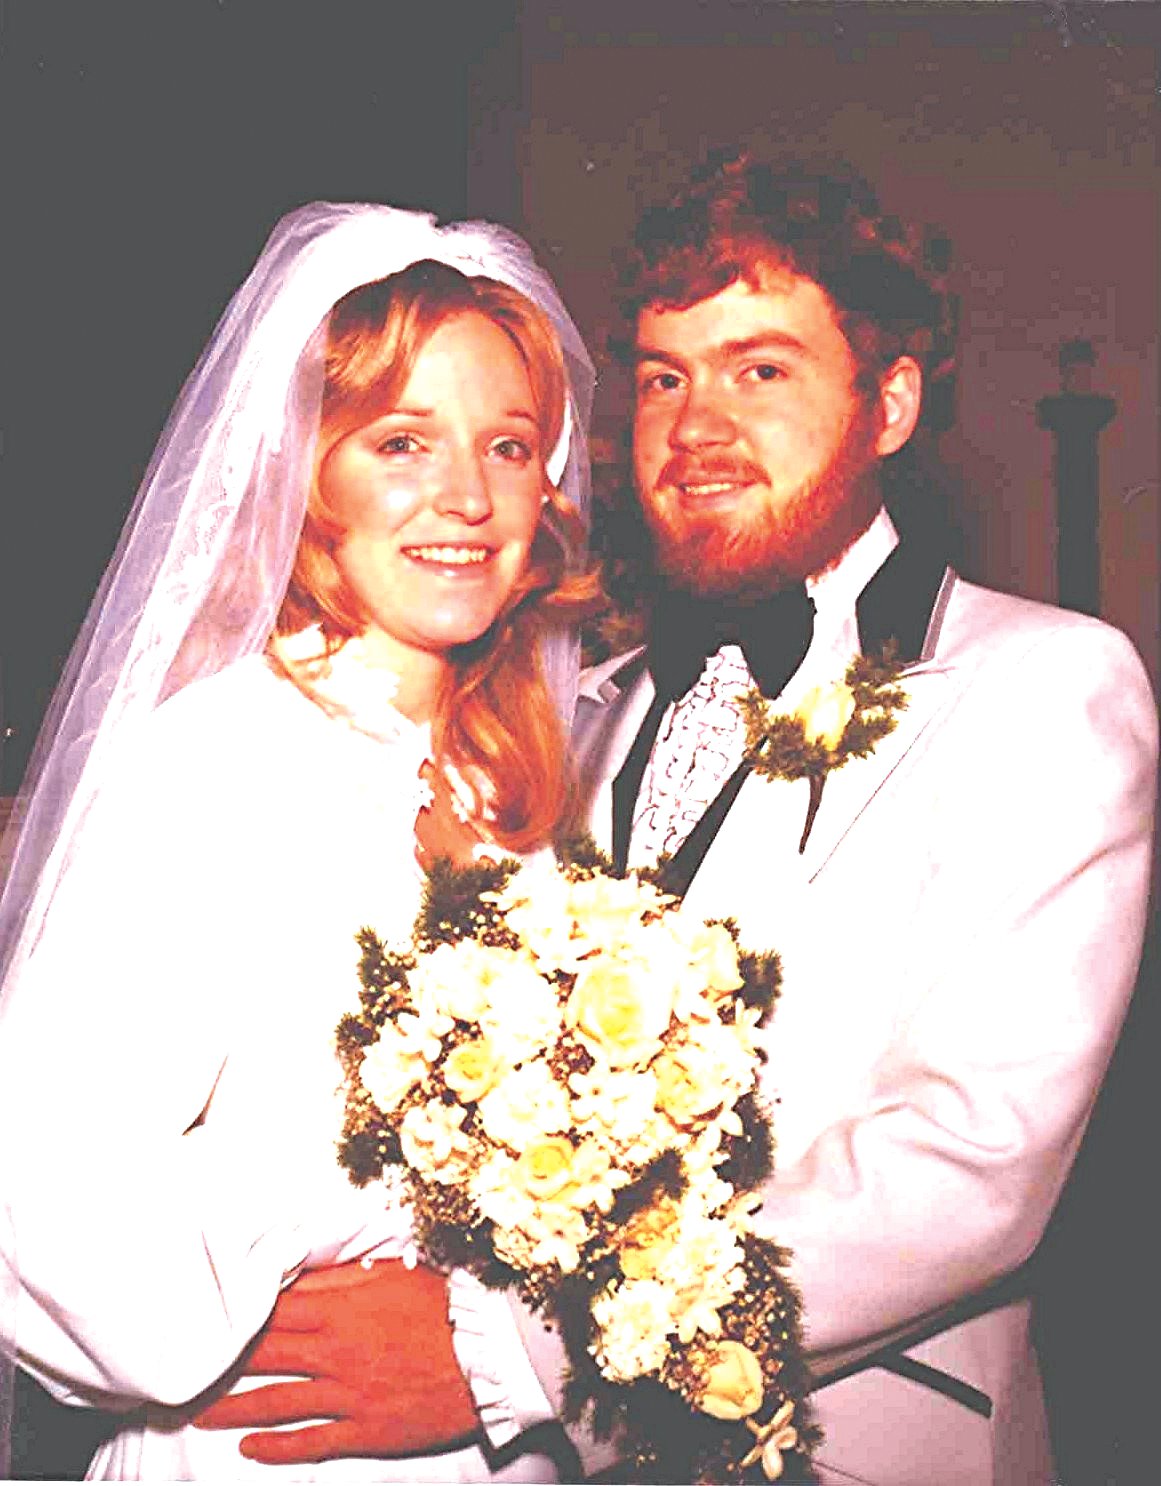 Gerald "Teddy" and Terra Girard on their wedding day and their 41st wedding anniversary on June 23, 2020.